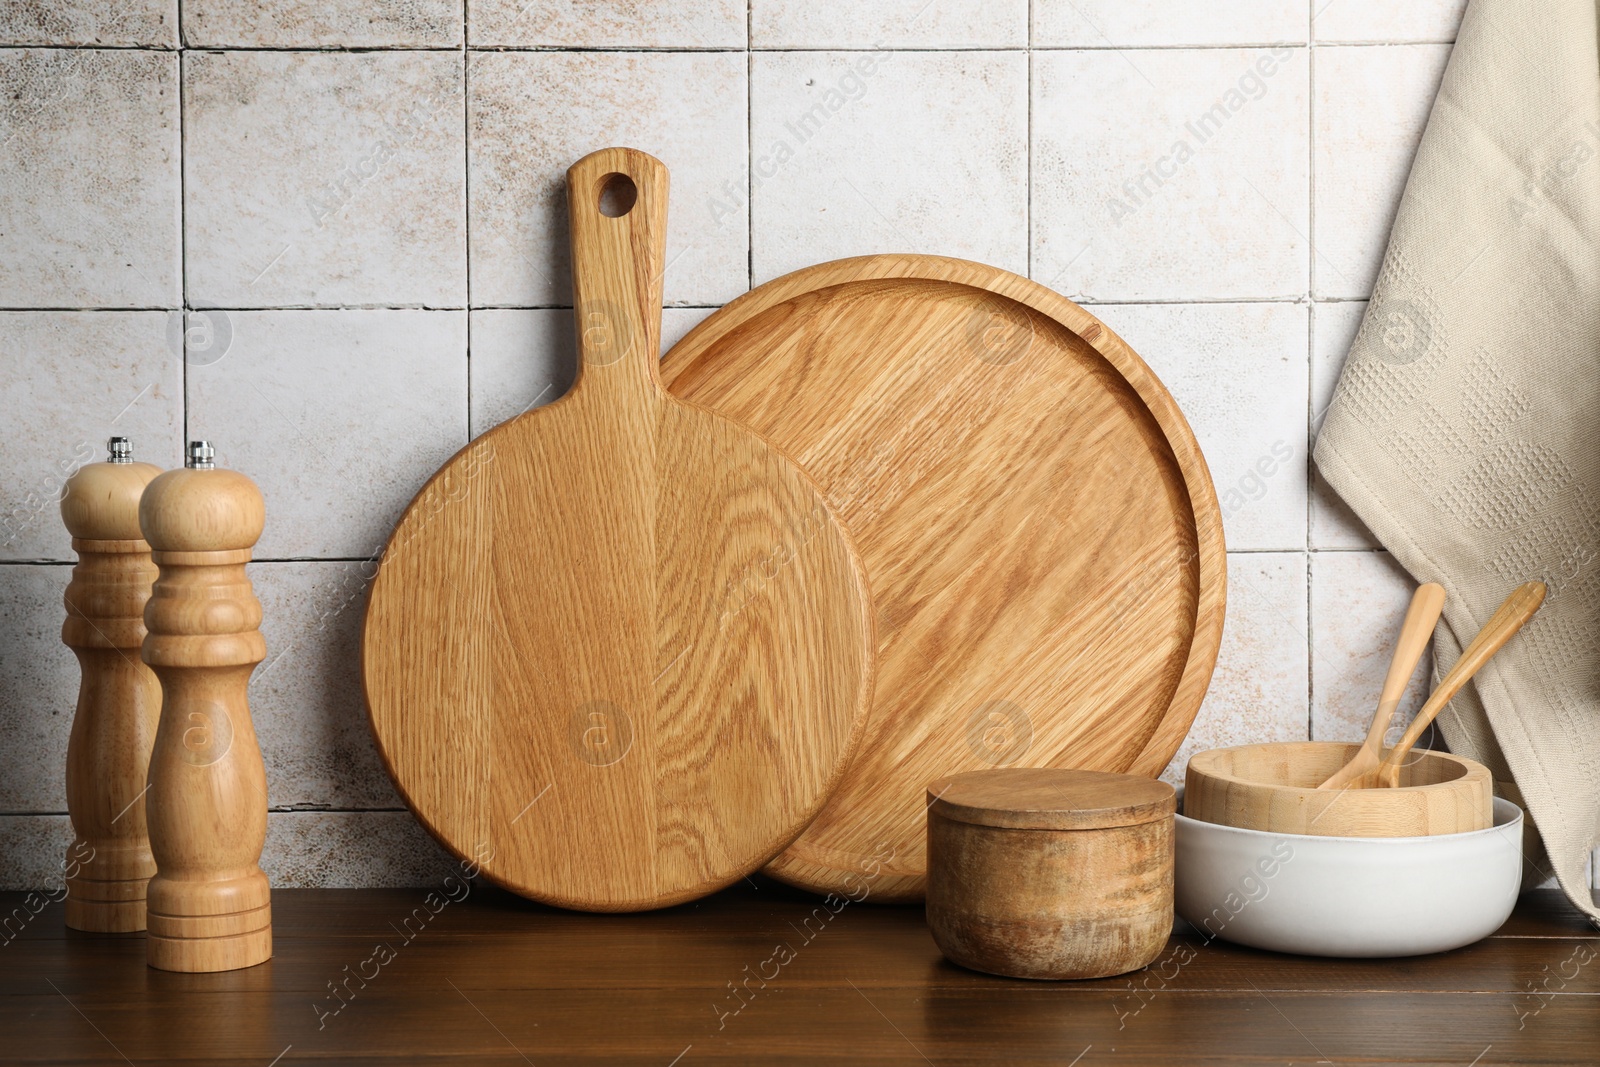 Photo of Wooden cutting boards and dishware on table near tiled wall